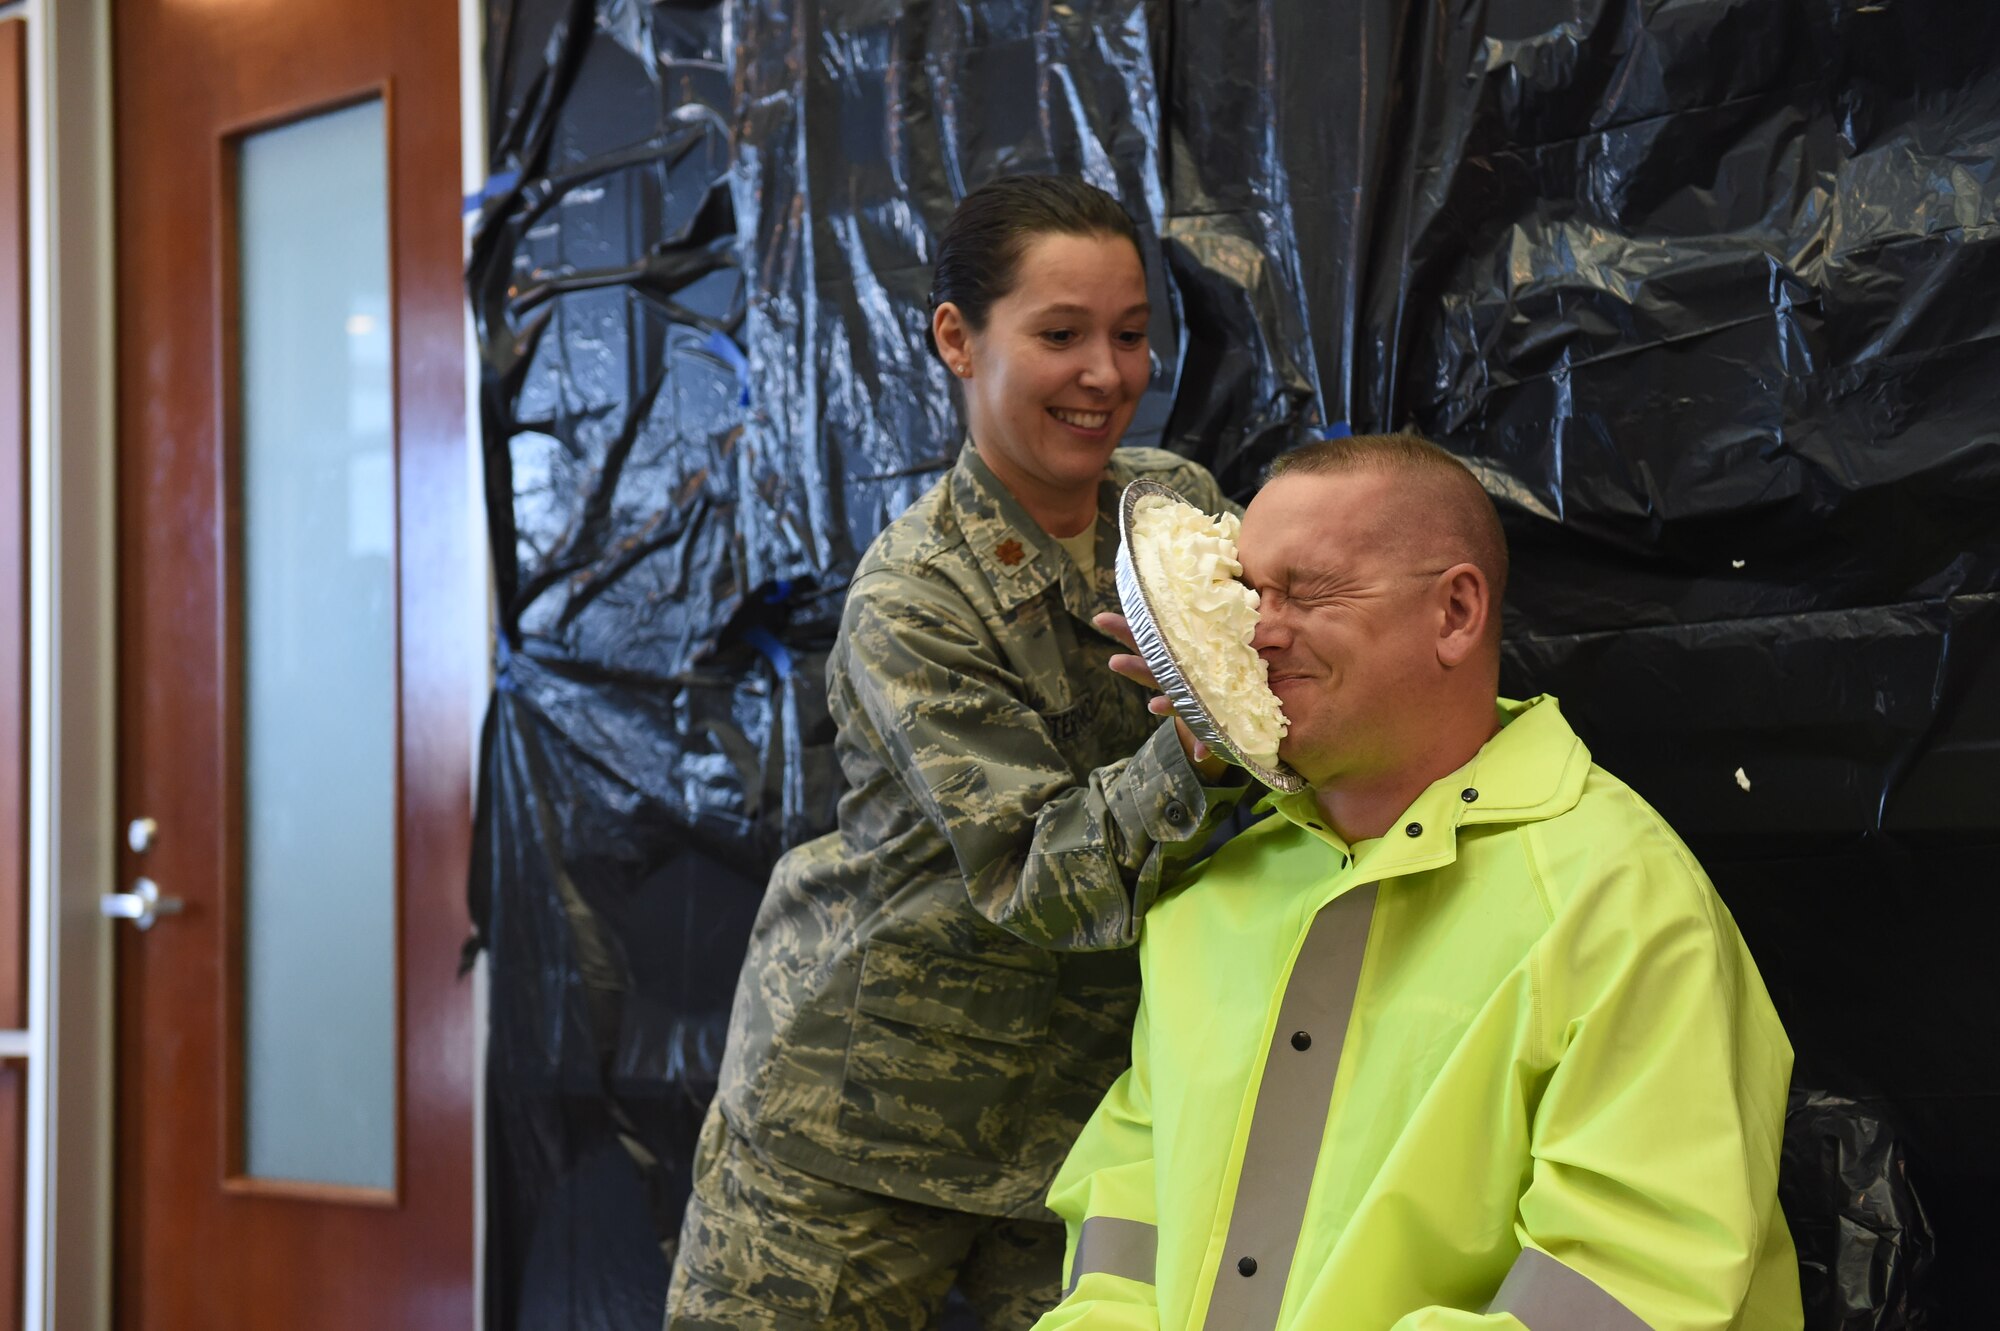 Lt. Col. Paul Freeman, 460th Space Wing chief of safety, takes a pie in the face from Maj. April Reveteriano, 460th Space Wing Individual Mobilization Augmentee to the chief of safety, as a fundraiser for the Combined Federal Campaign Nov. 20, 2015, on Buckley Air Force Base, Colo. Buckley AFB held Wingman Day in order to recognize the men and women who continue the mission of the 460th Space Wing each and every day. (U.S. Air Force photo by Airman 1st Class Luke W. Nowakowski/Released)